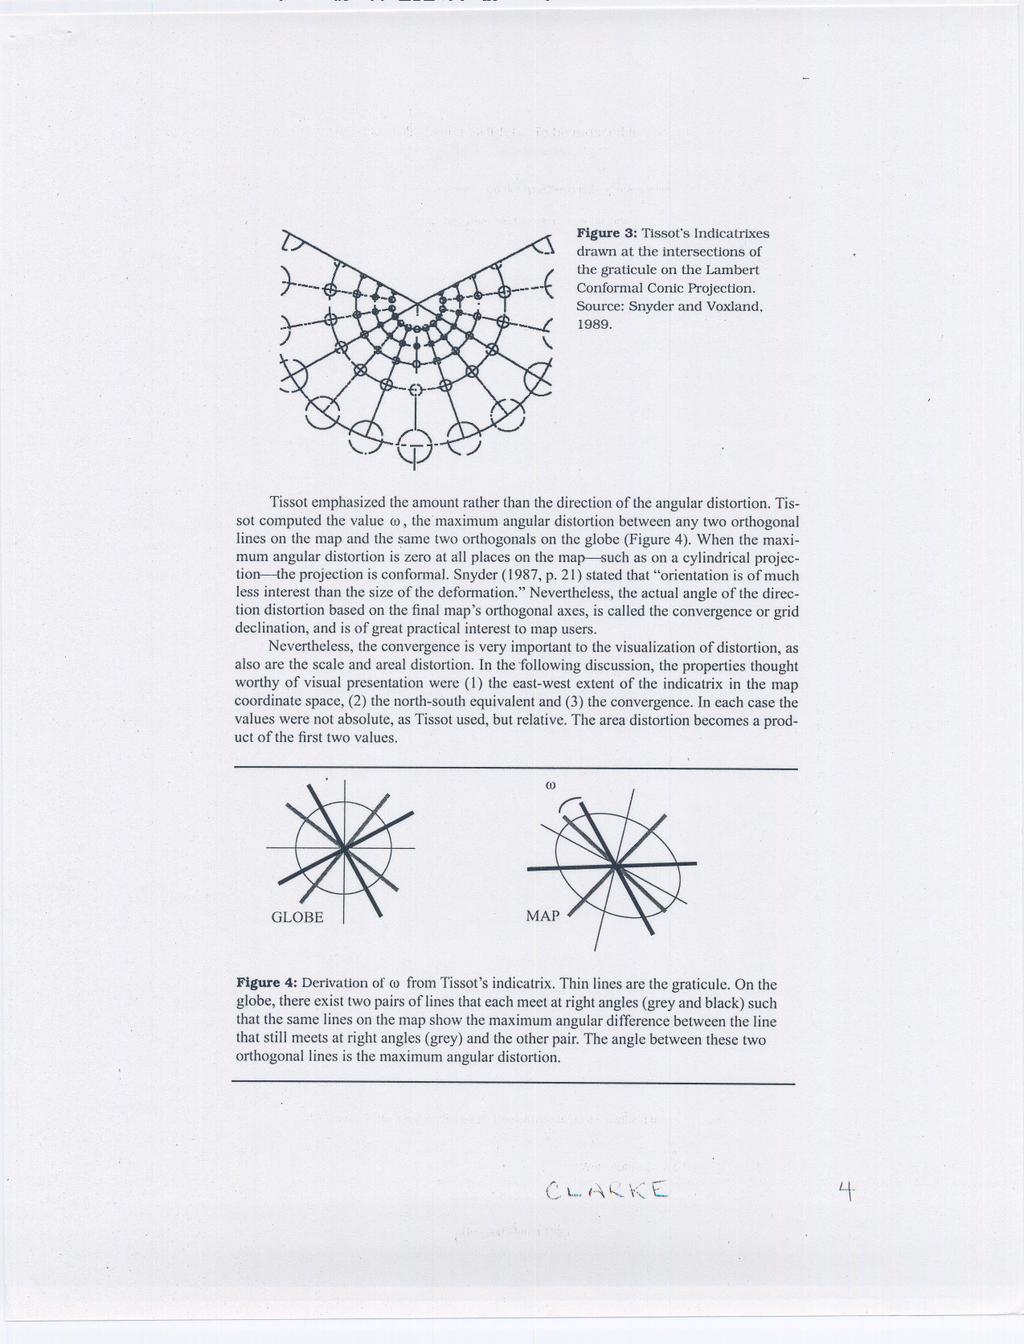 Figure 3: Tissot's Indicatrixes drawn at the intersections of the graticule on the Lambert Conformal Conic Projection. Source: Snyder and Voxland. 1989.